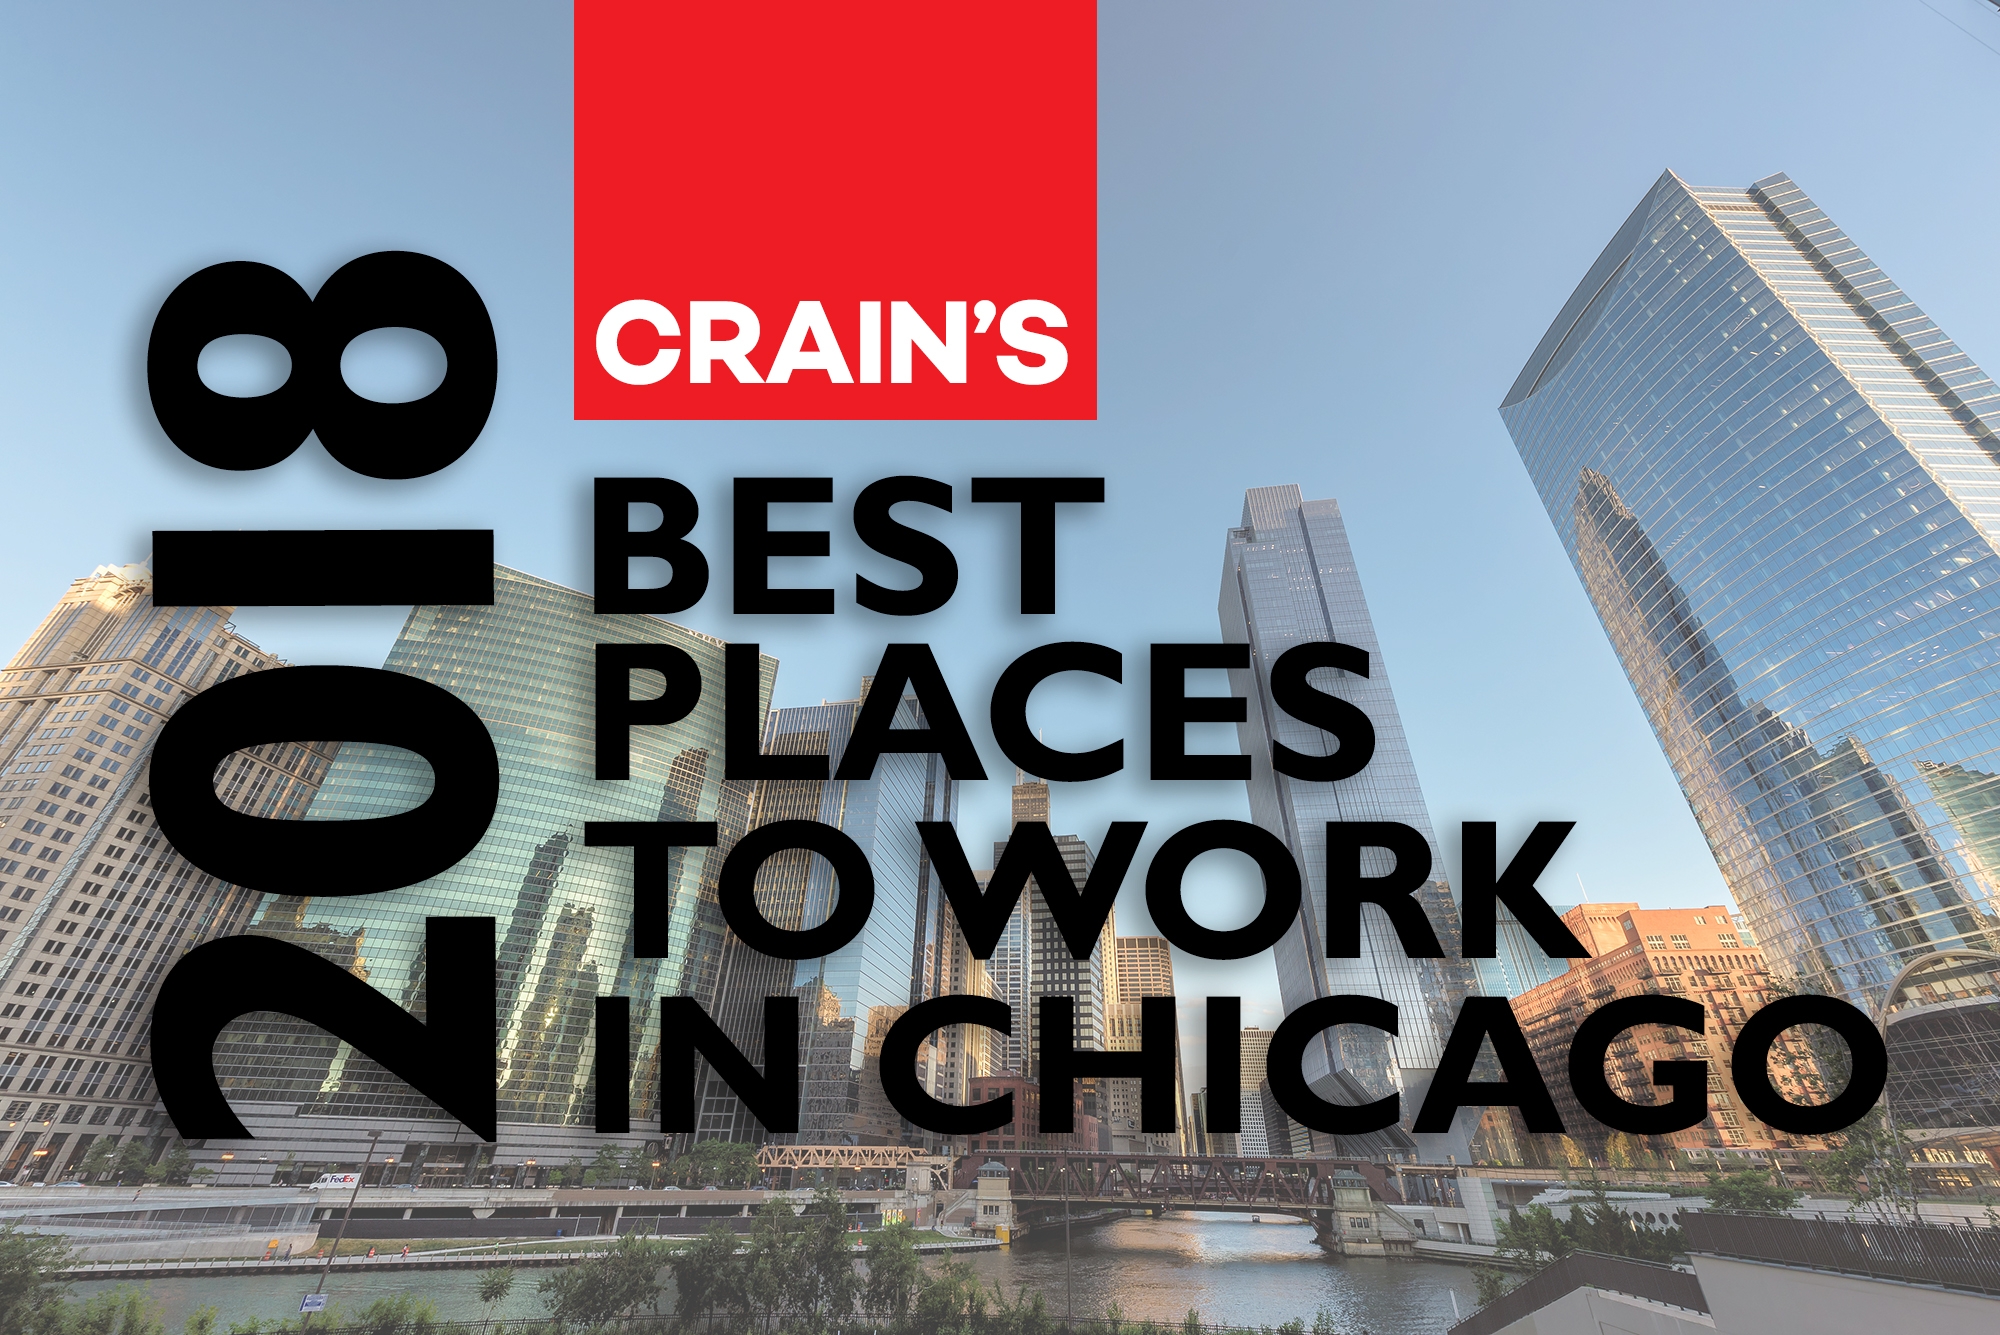 2018 Chicago Tribune top places to work image